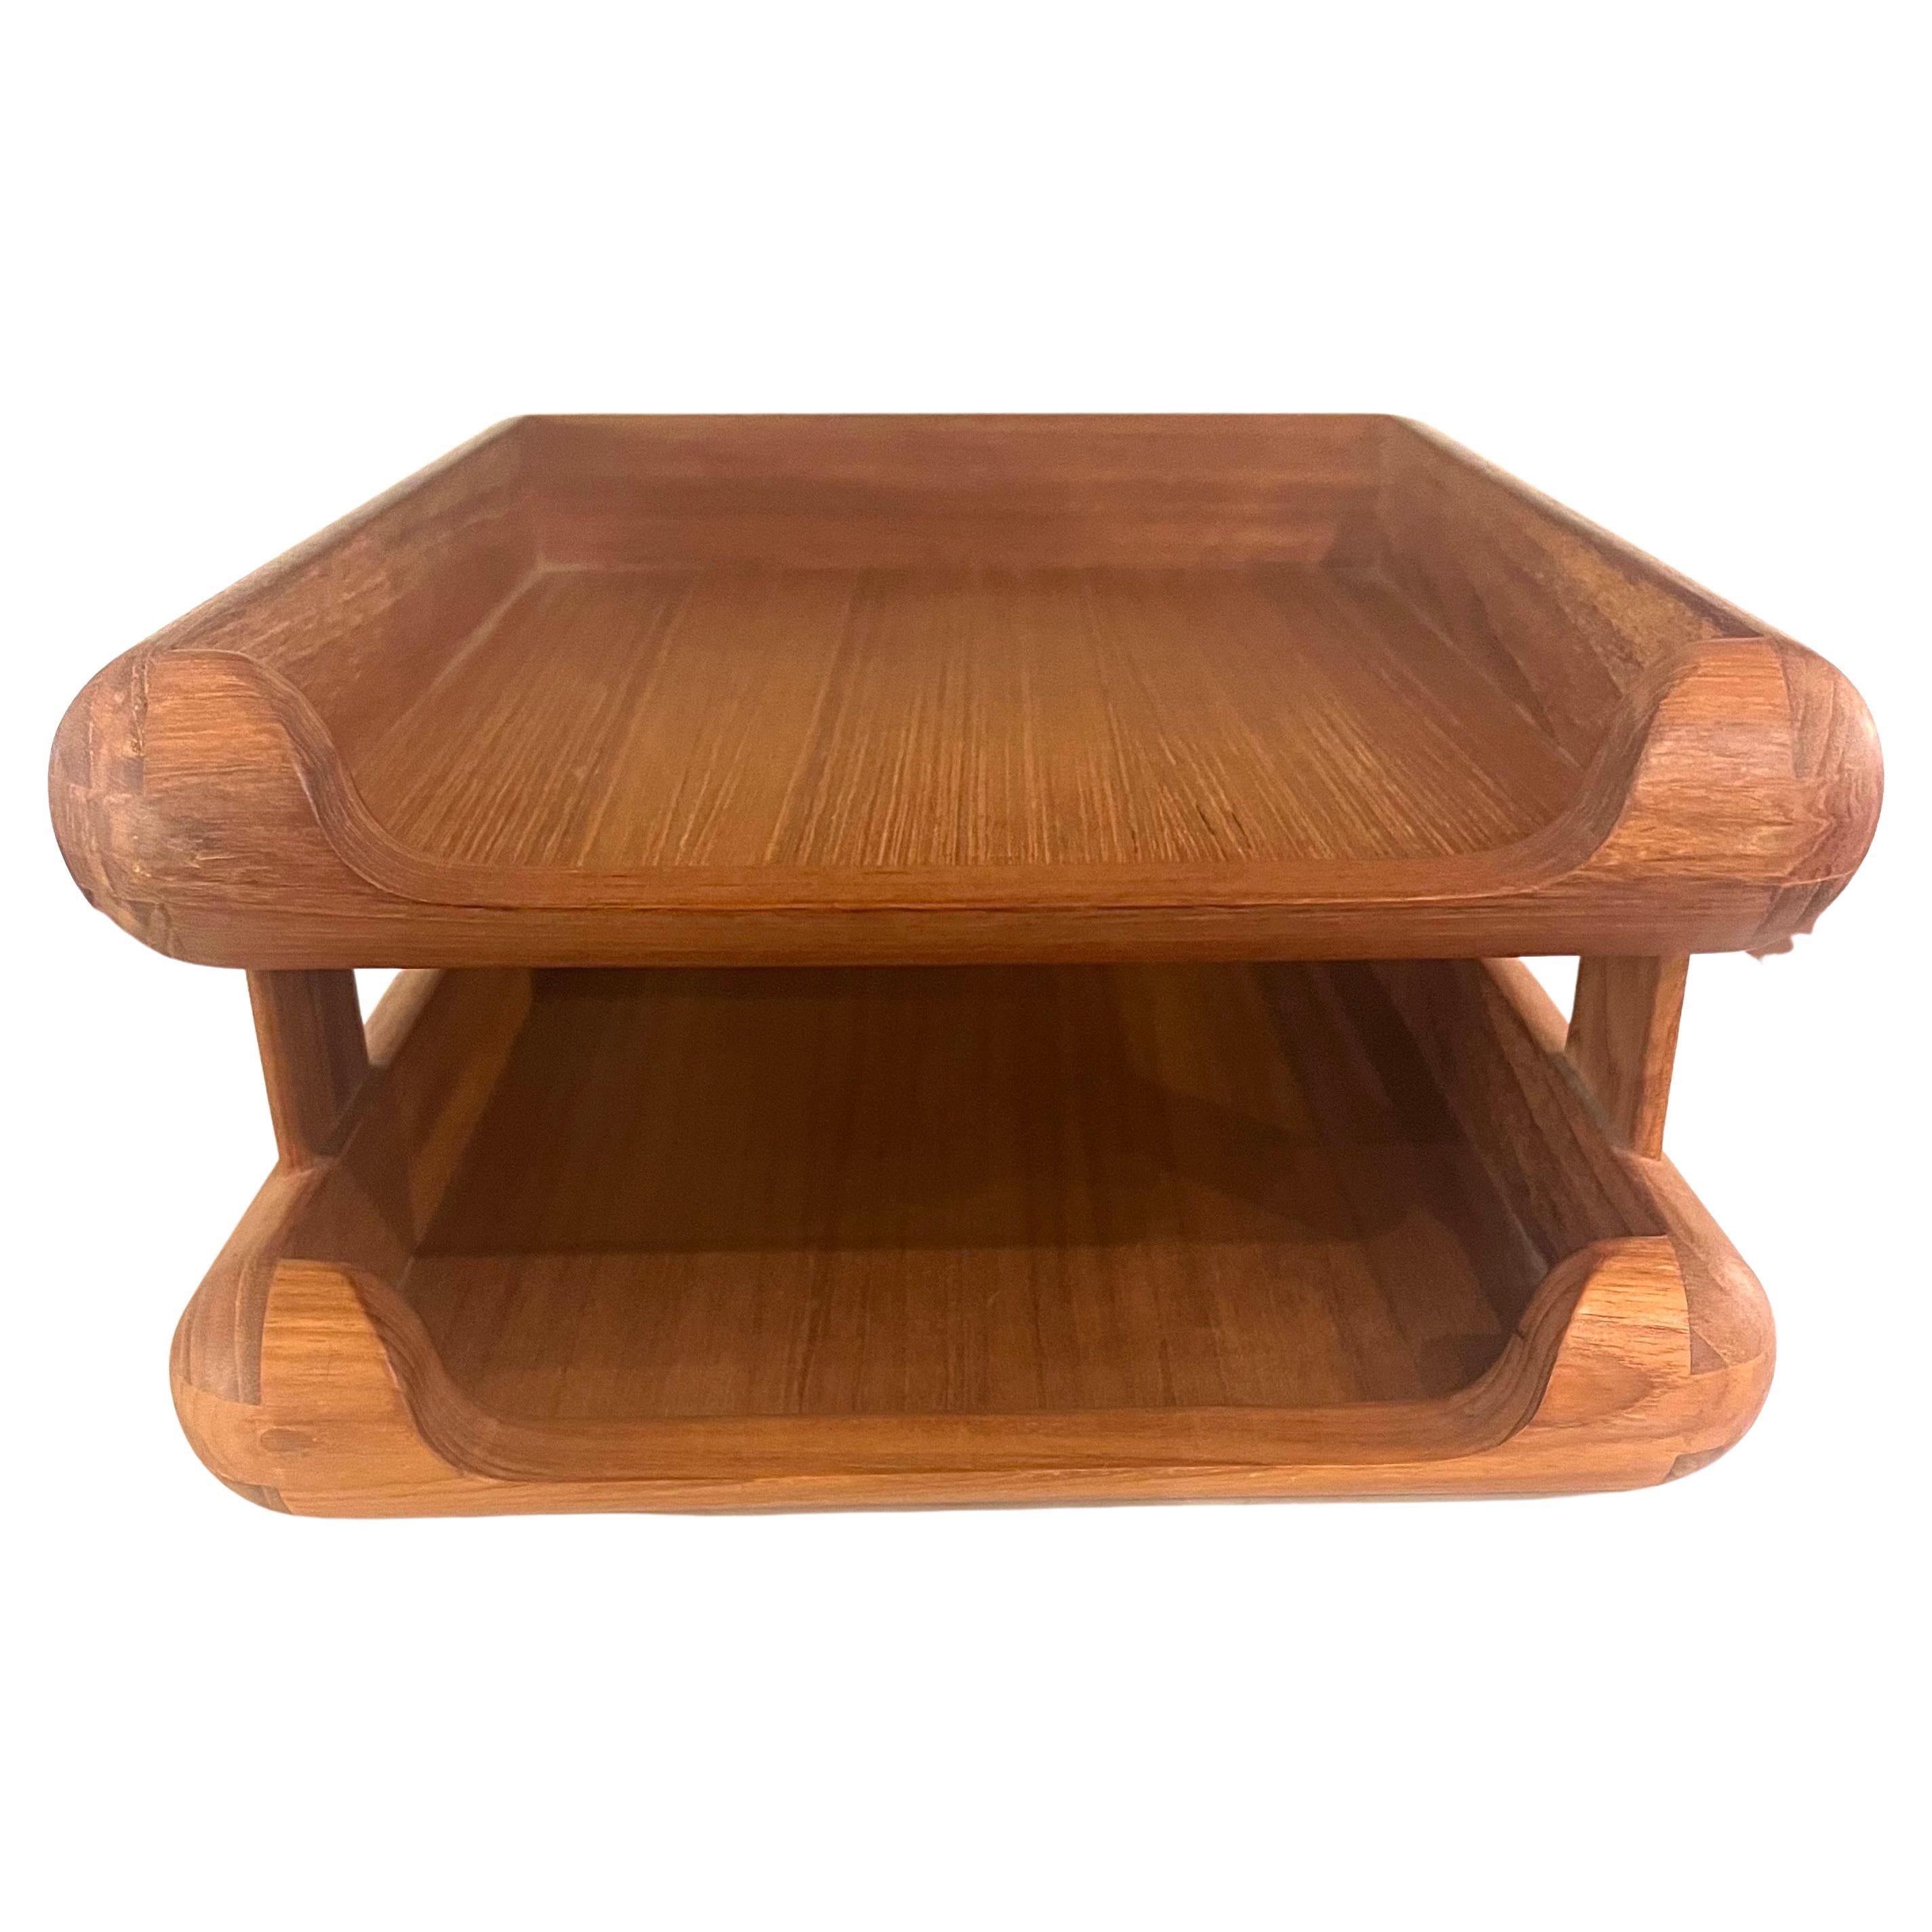 Very cool and functional Danish modern teak double letter desk tray circa the 1980s. The trays are made of dovetailed solid teak. The piece is in very good condition and would make a great addition to any midcentury office.